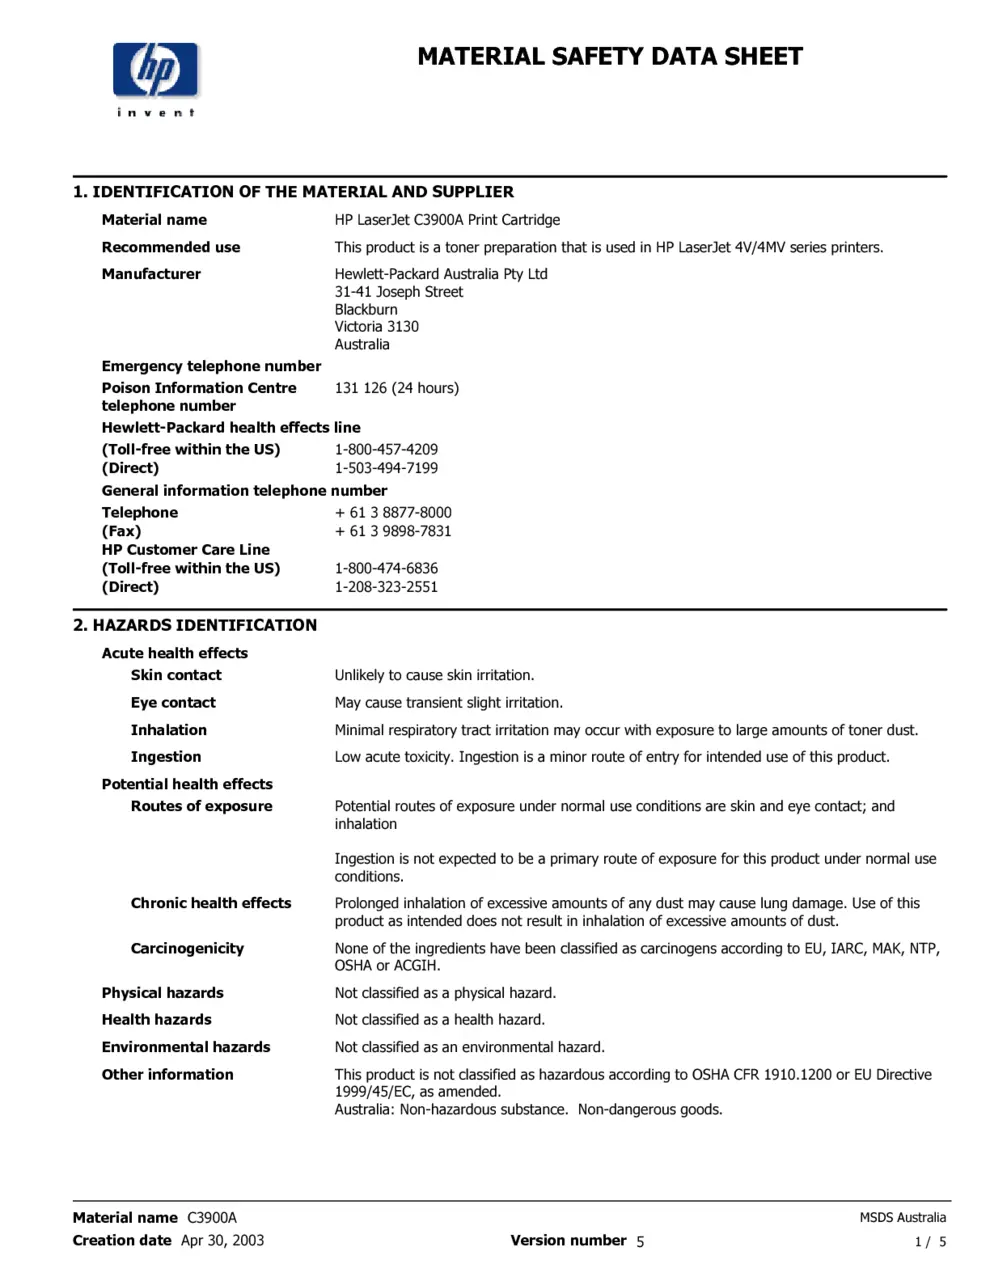 hp - hewlett packard company msds - What is material safety data sheet PDF